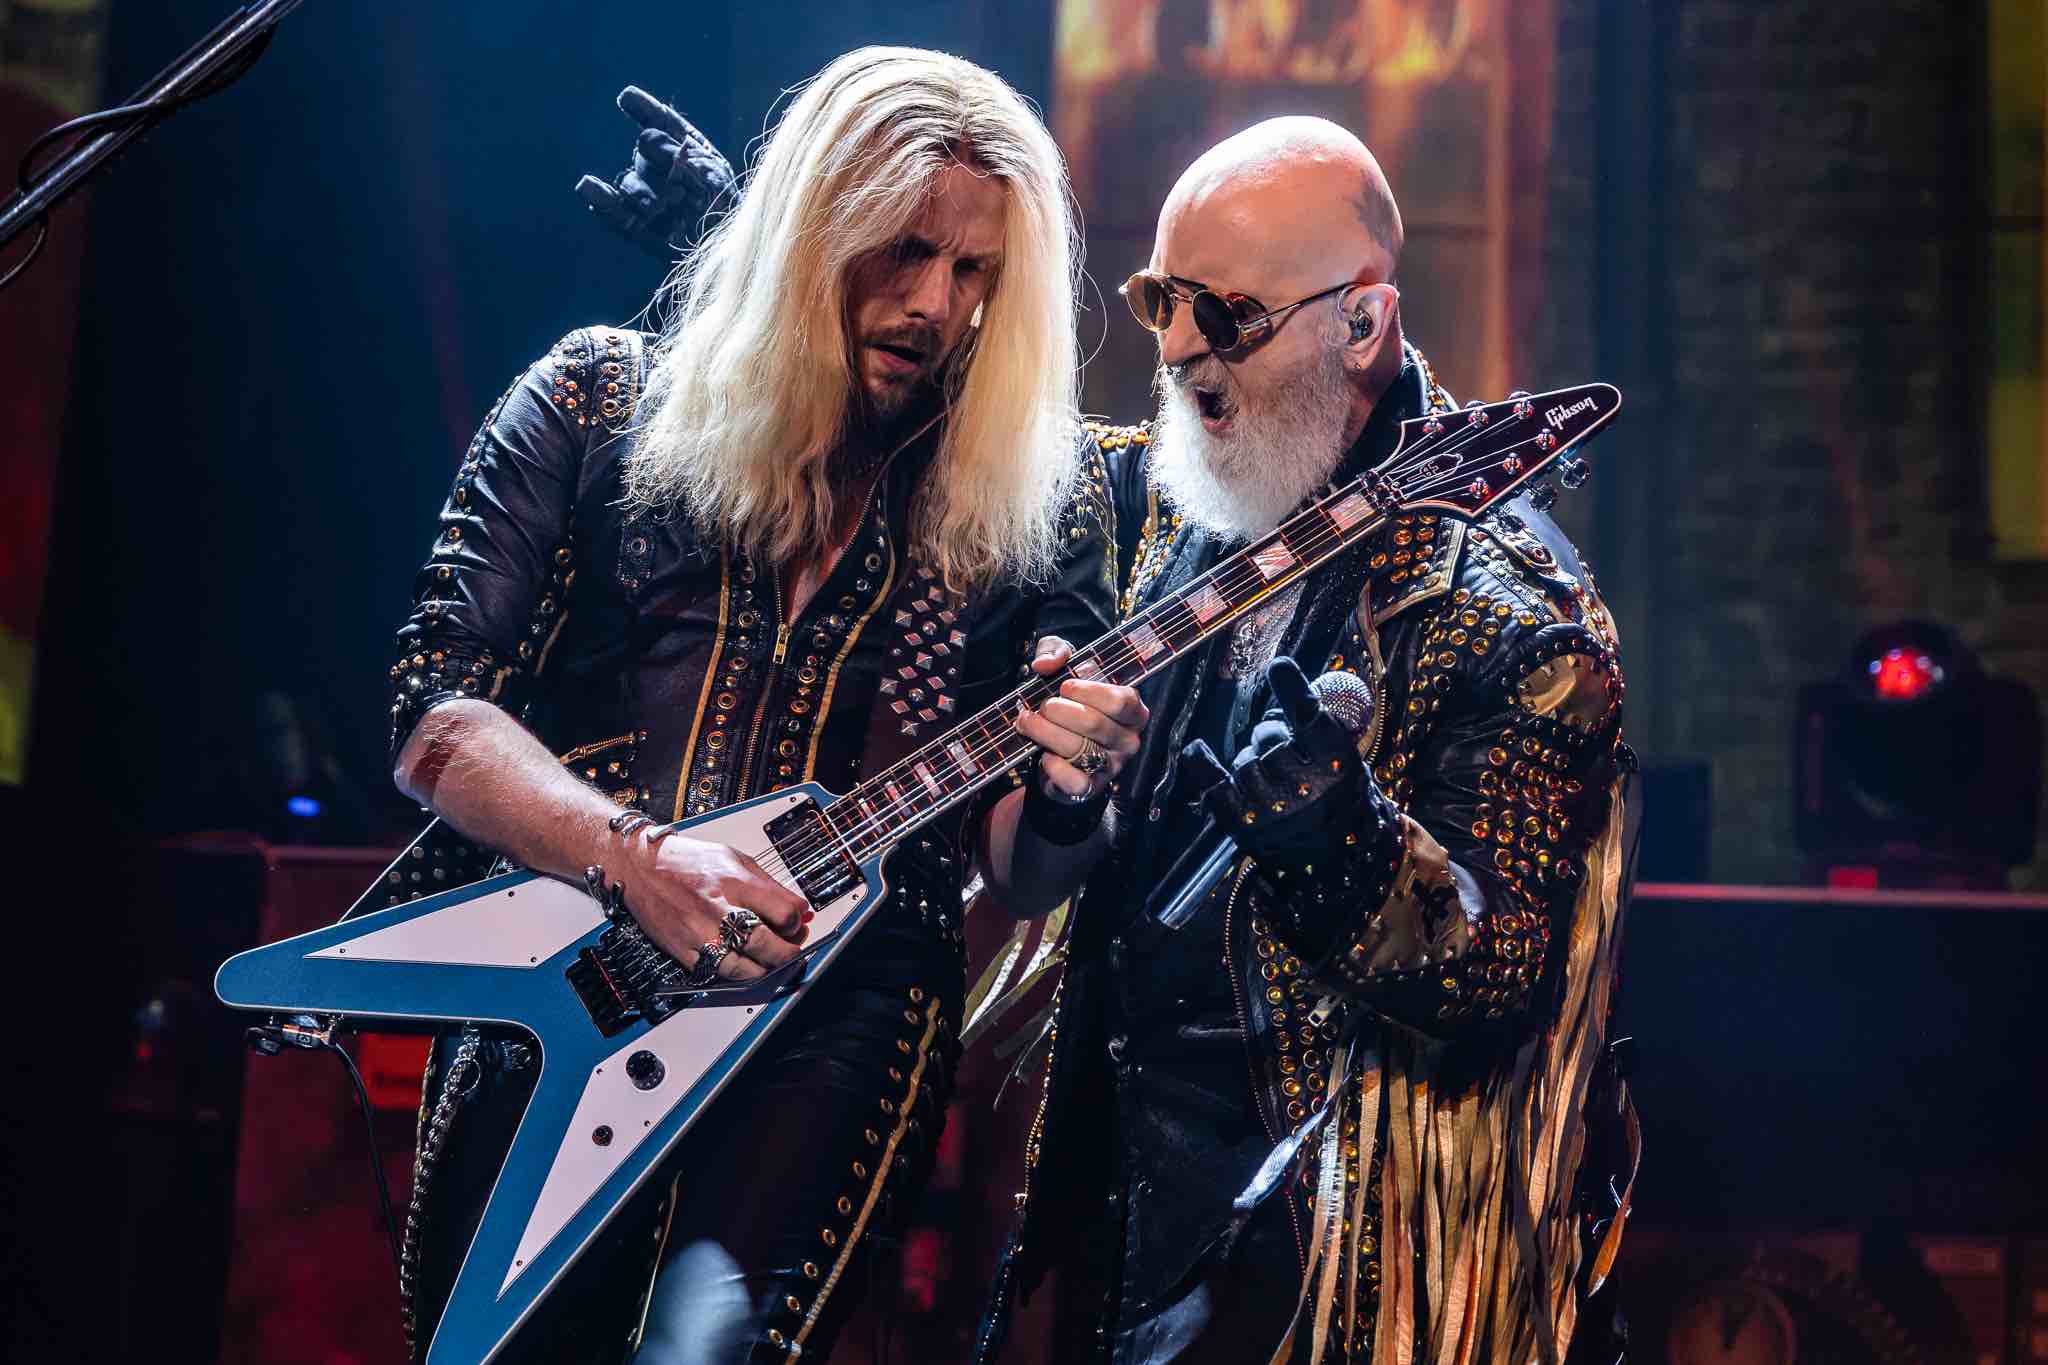 Judas Priest celebrated 50 Heavy Metal Years at Place Bell (photos